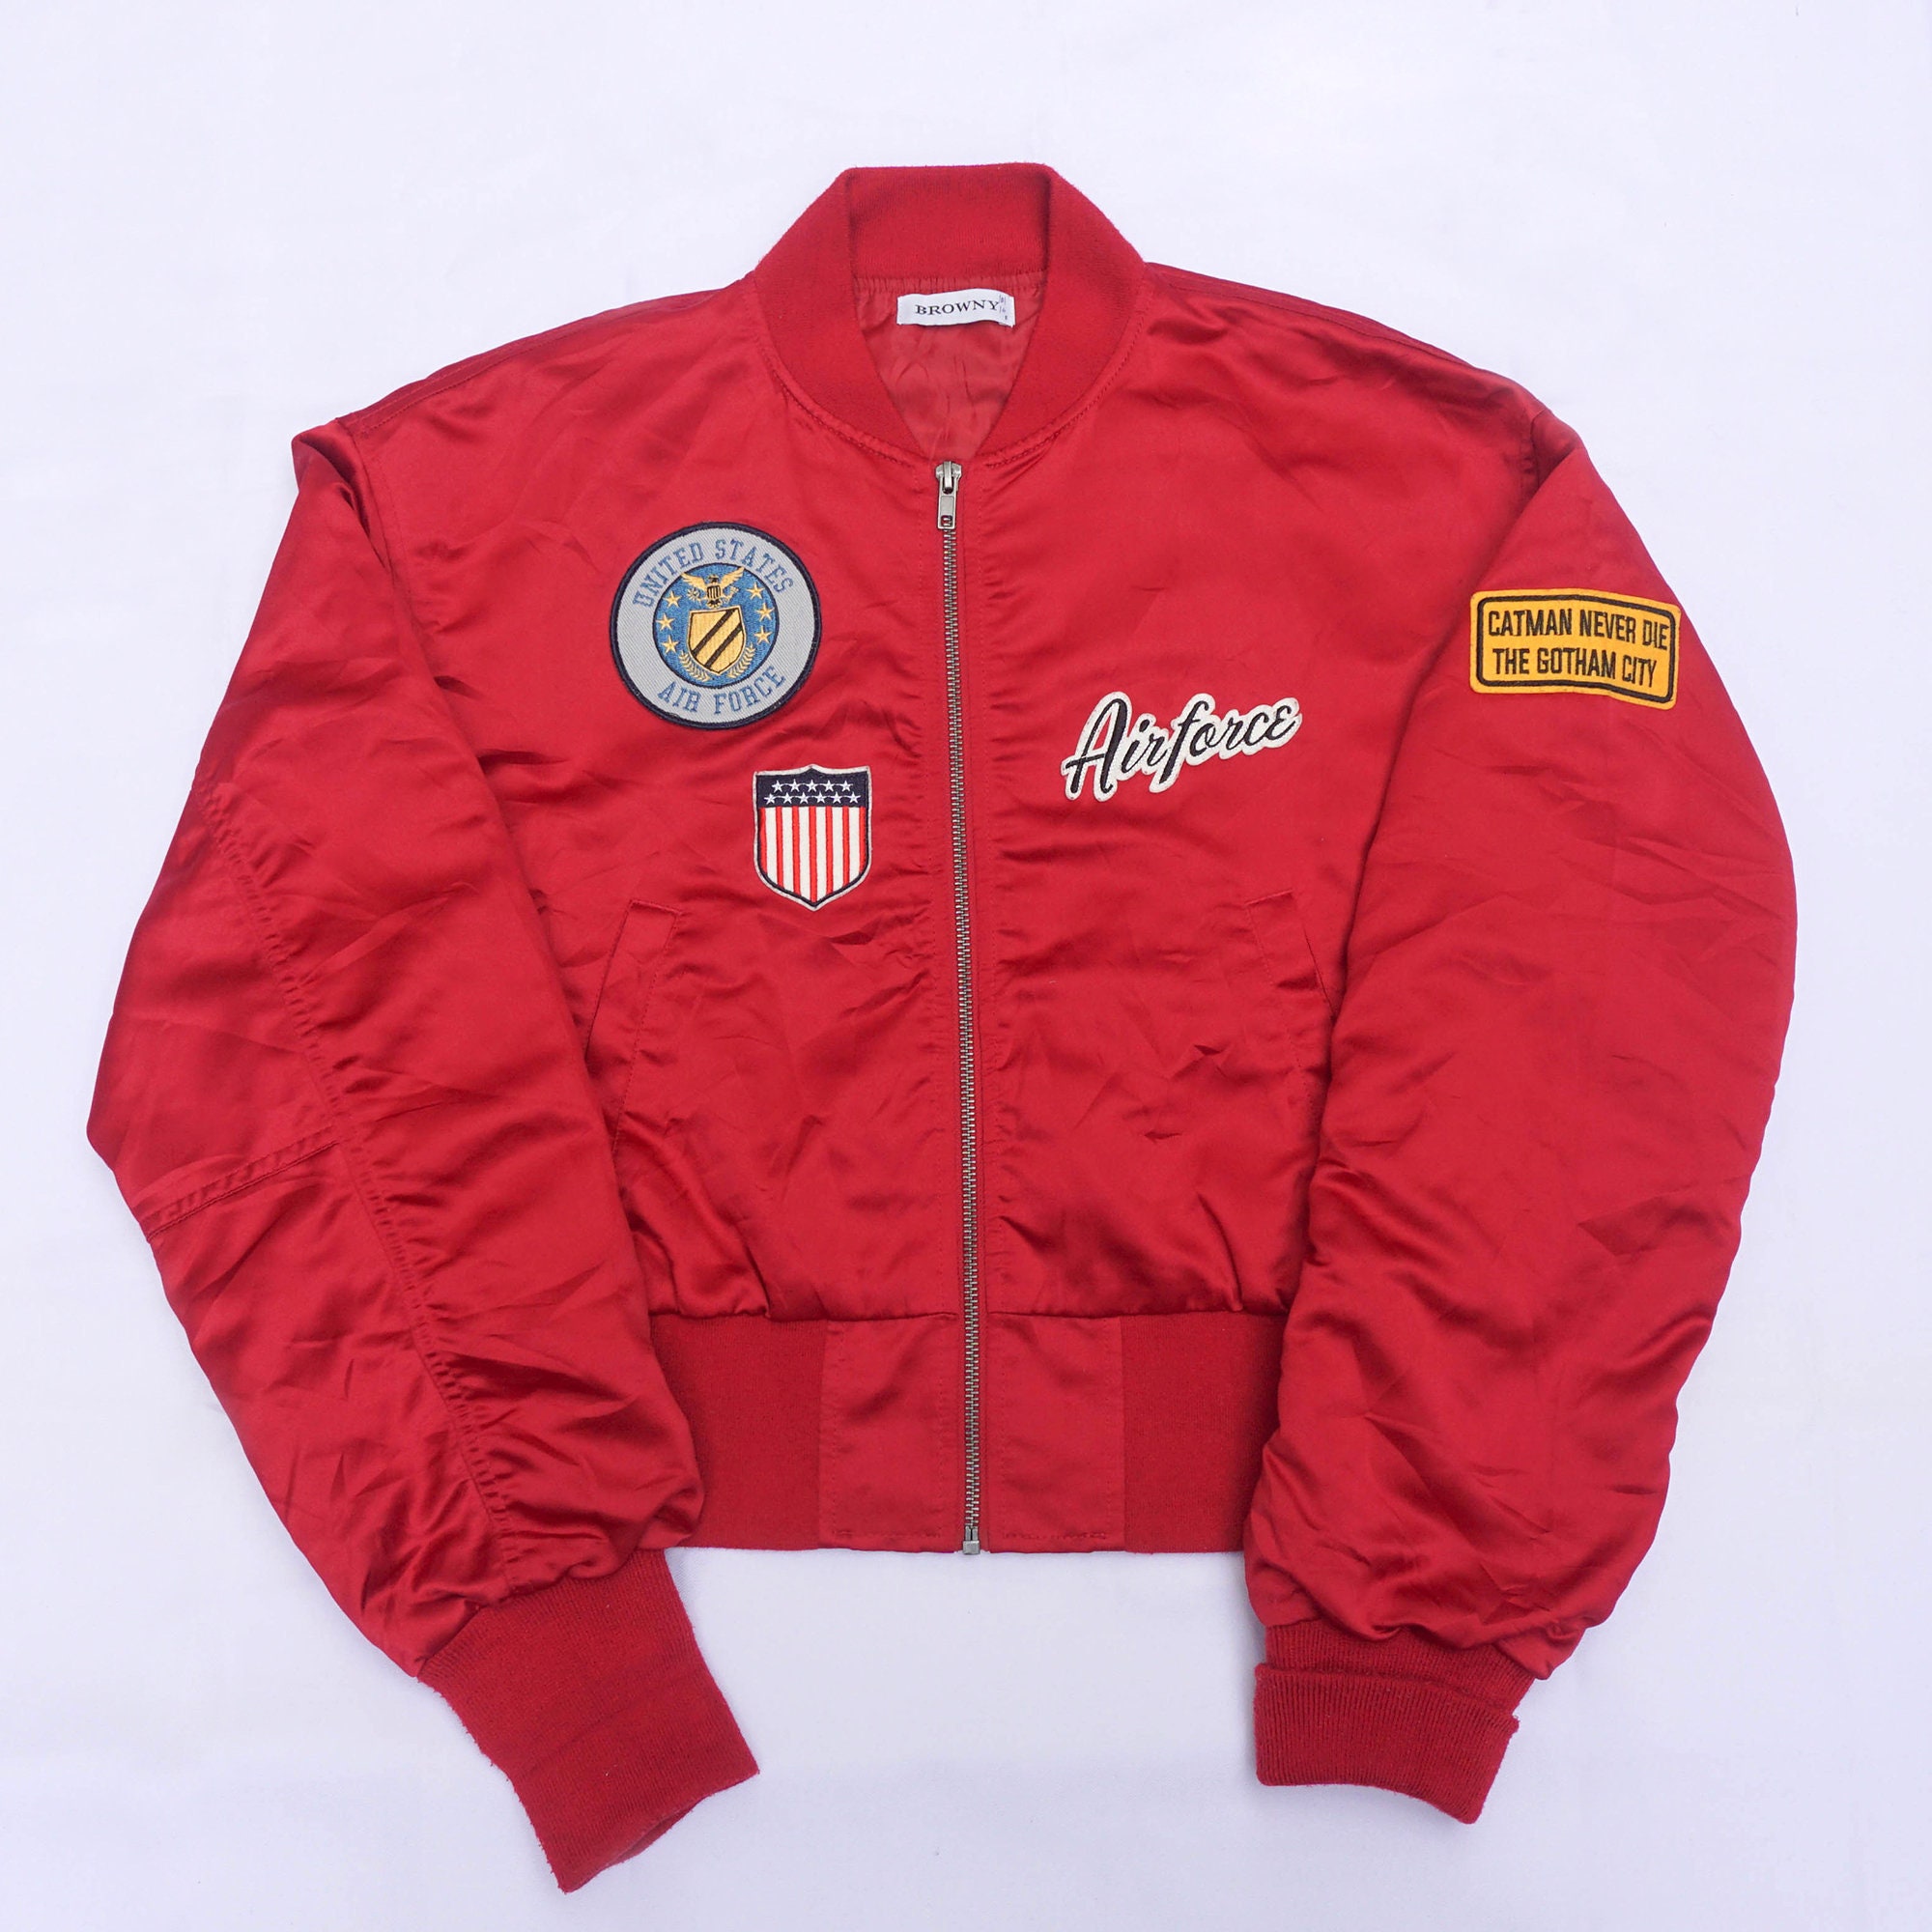 BROWNY Airforce Bomber Jacket Embroidered Patched Red Jacket - Etsy